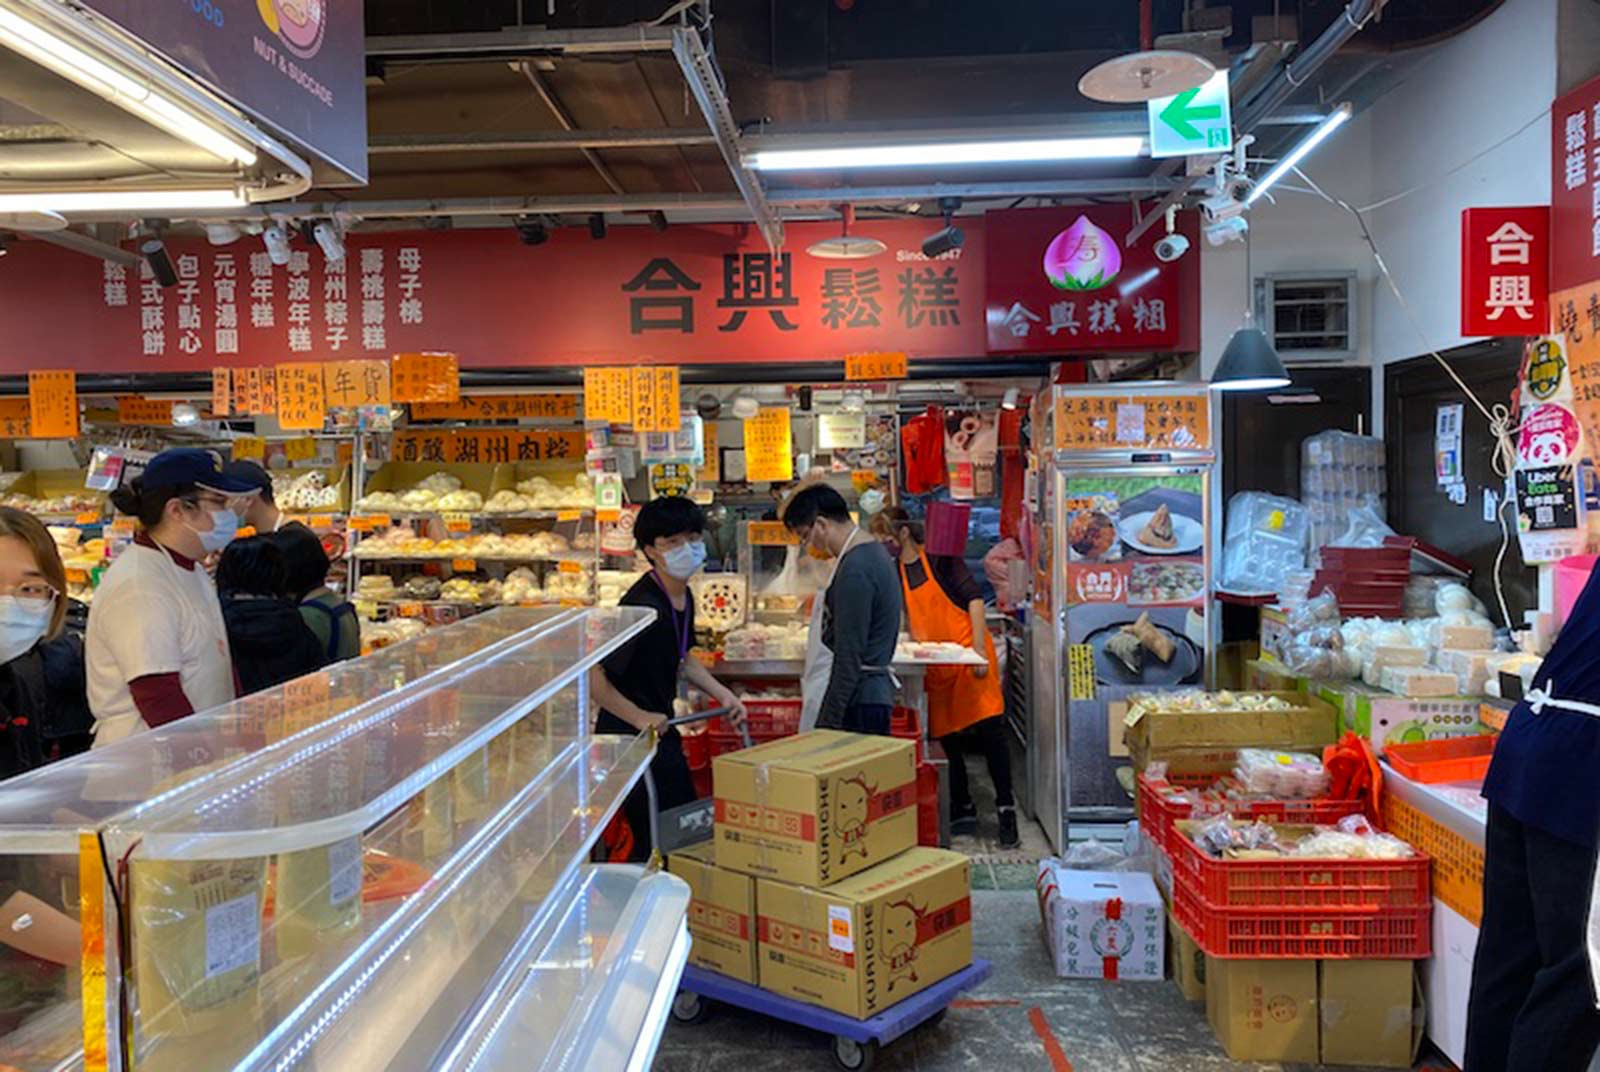 Your guide to Chinese New Year shopping at Nanmen Market